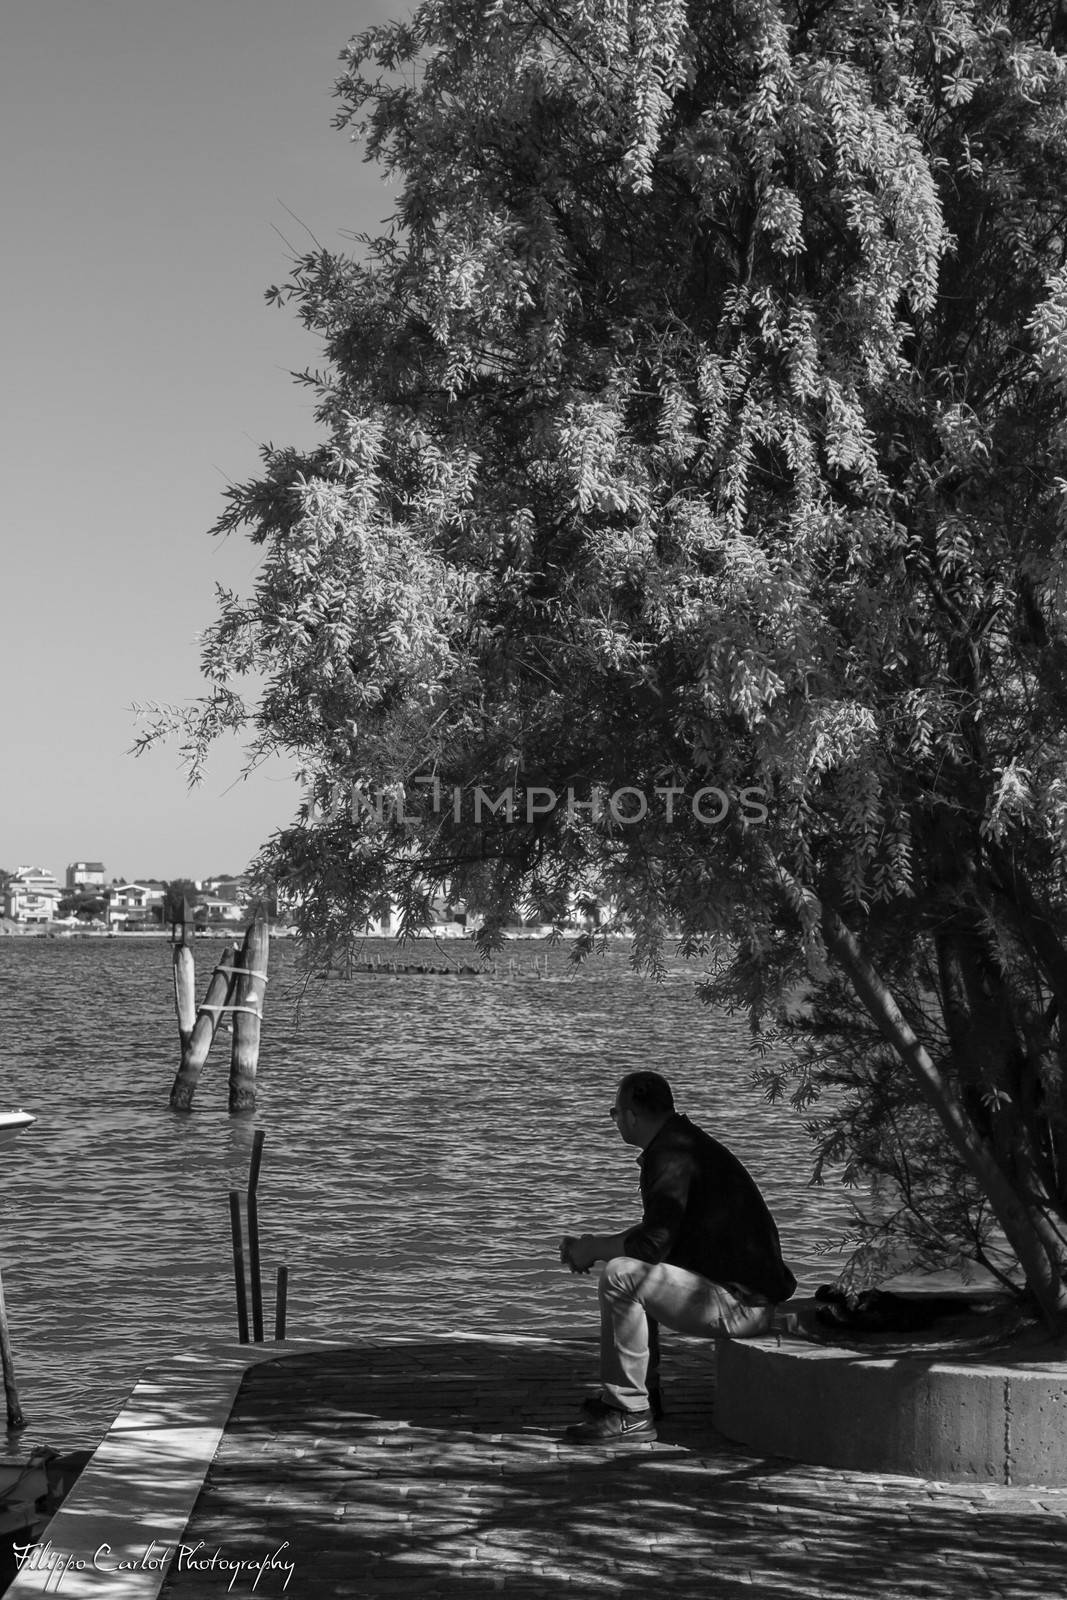 Man sitting watching the sea, image in black and white